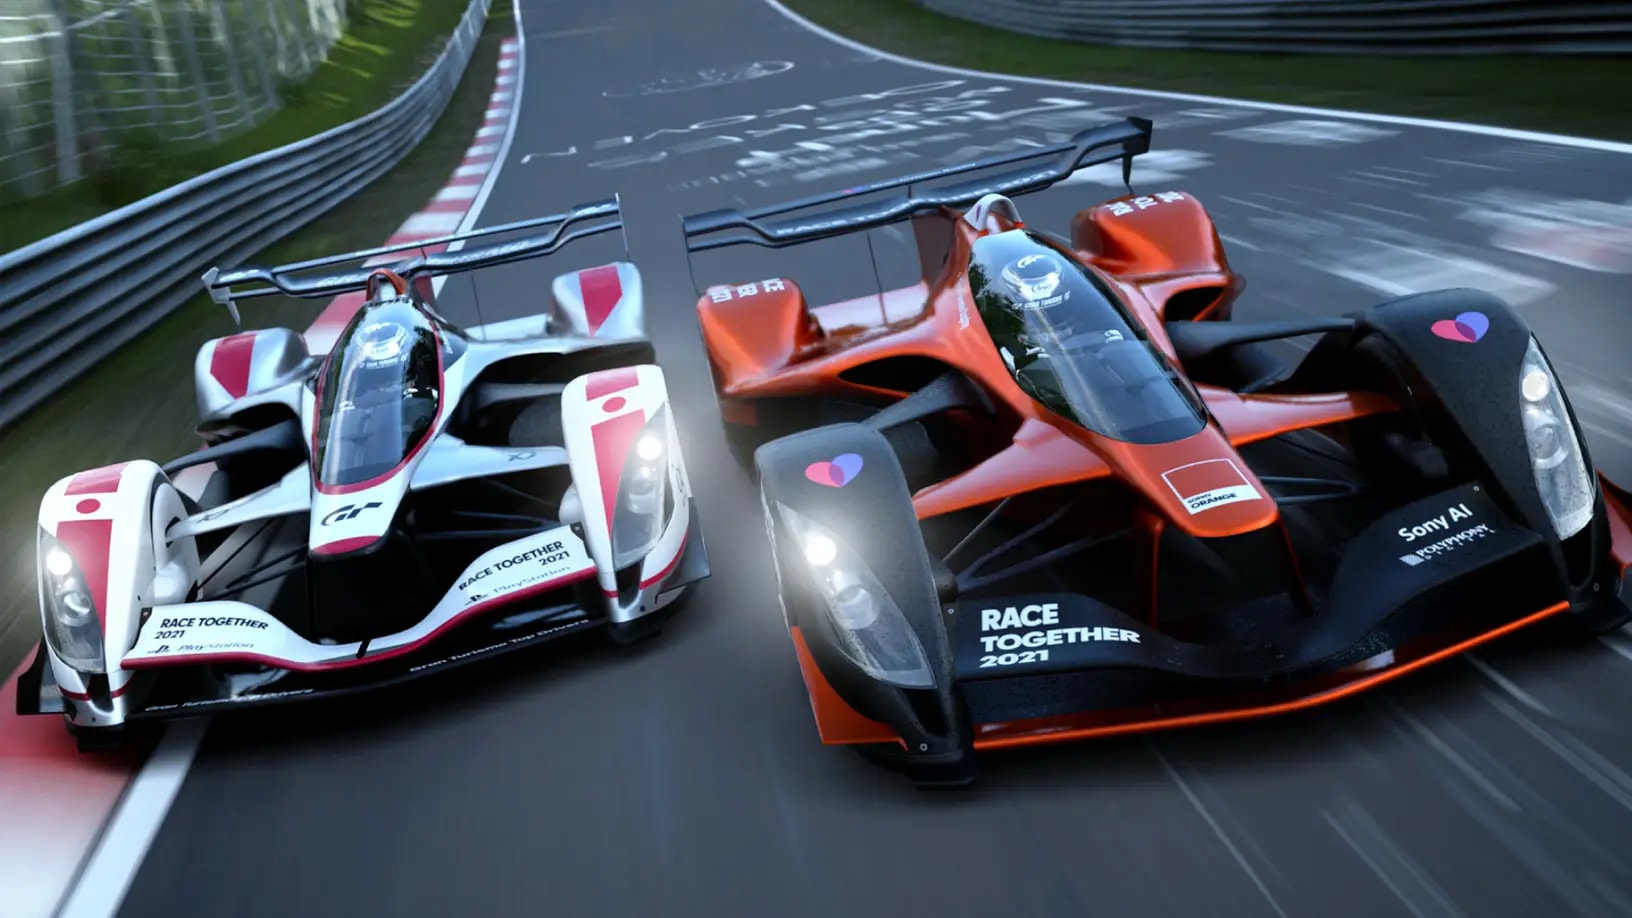 Gran Turismo' offers decent racing among mostly formulaic biopic